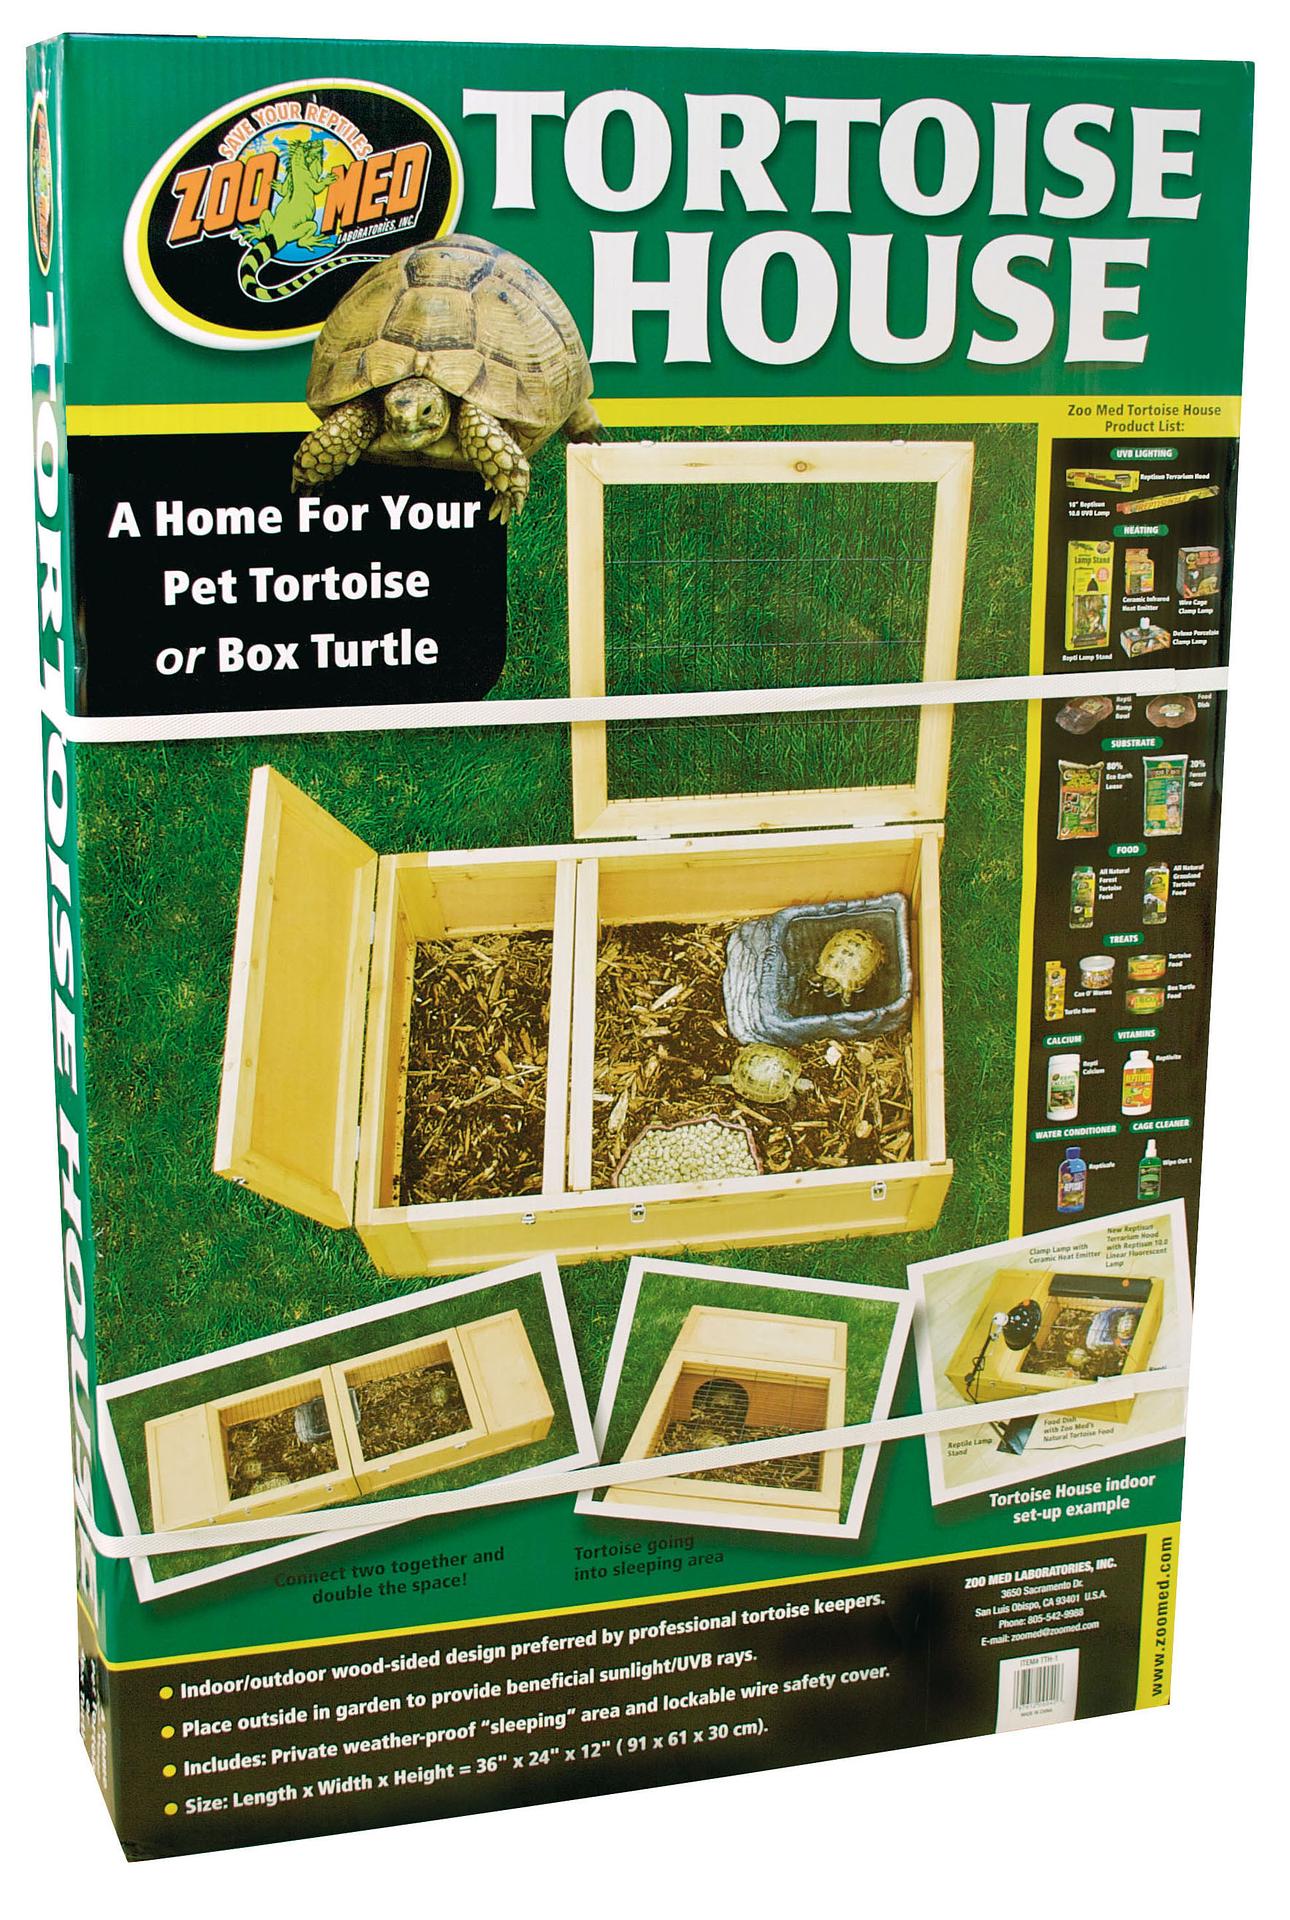 ZooMed Tortoise House, Box d’élevage pour tortues